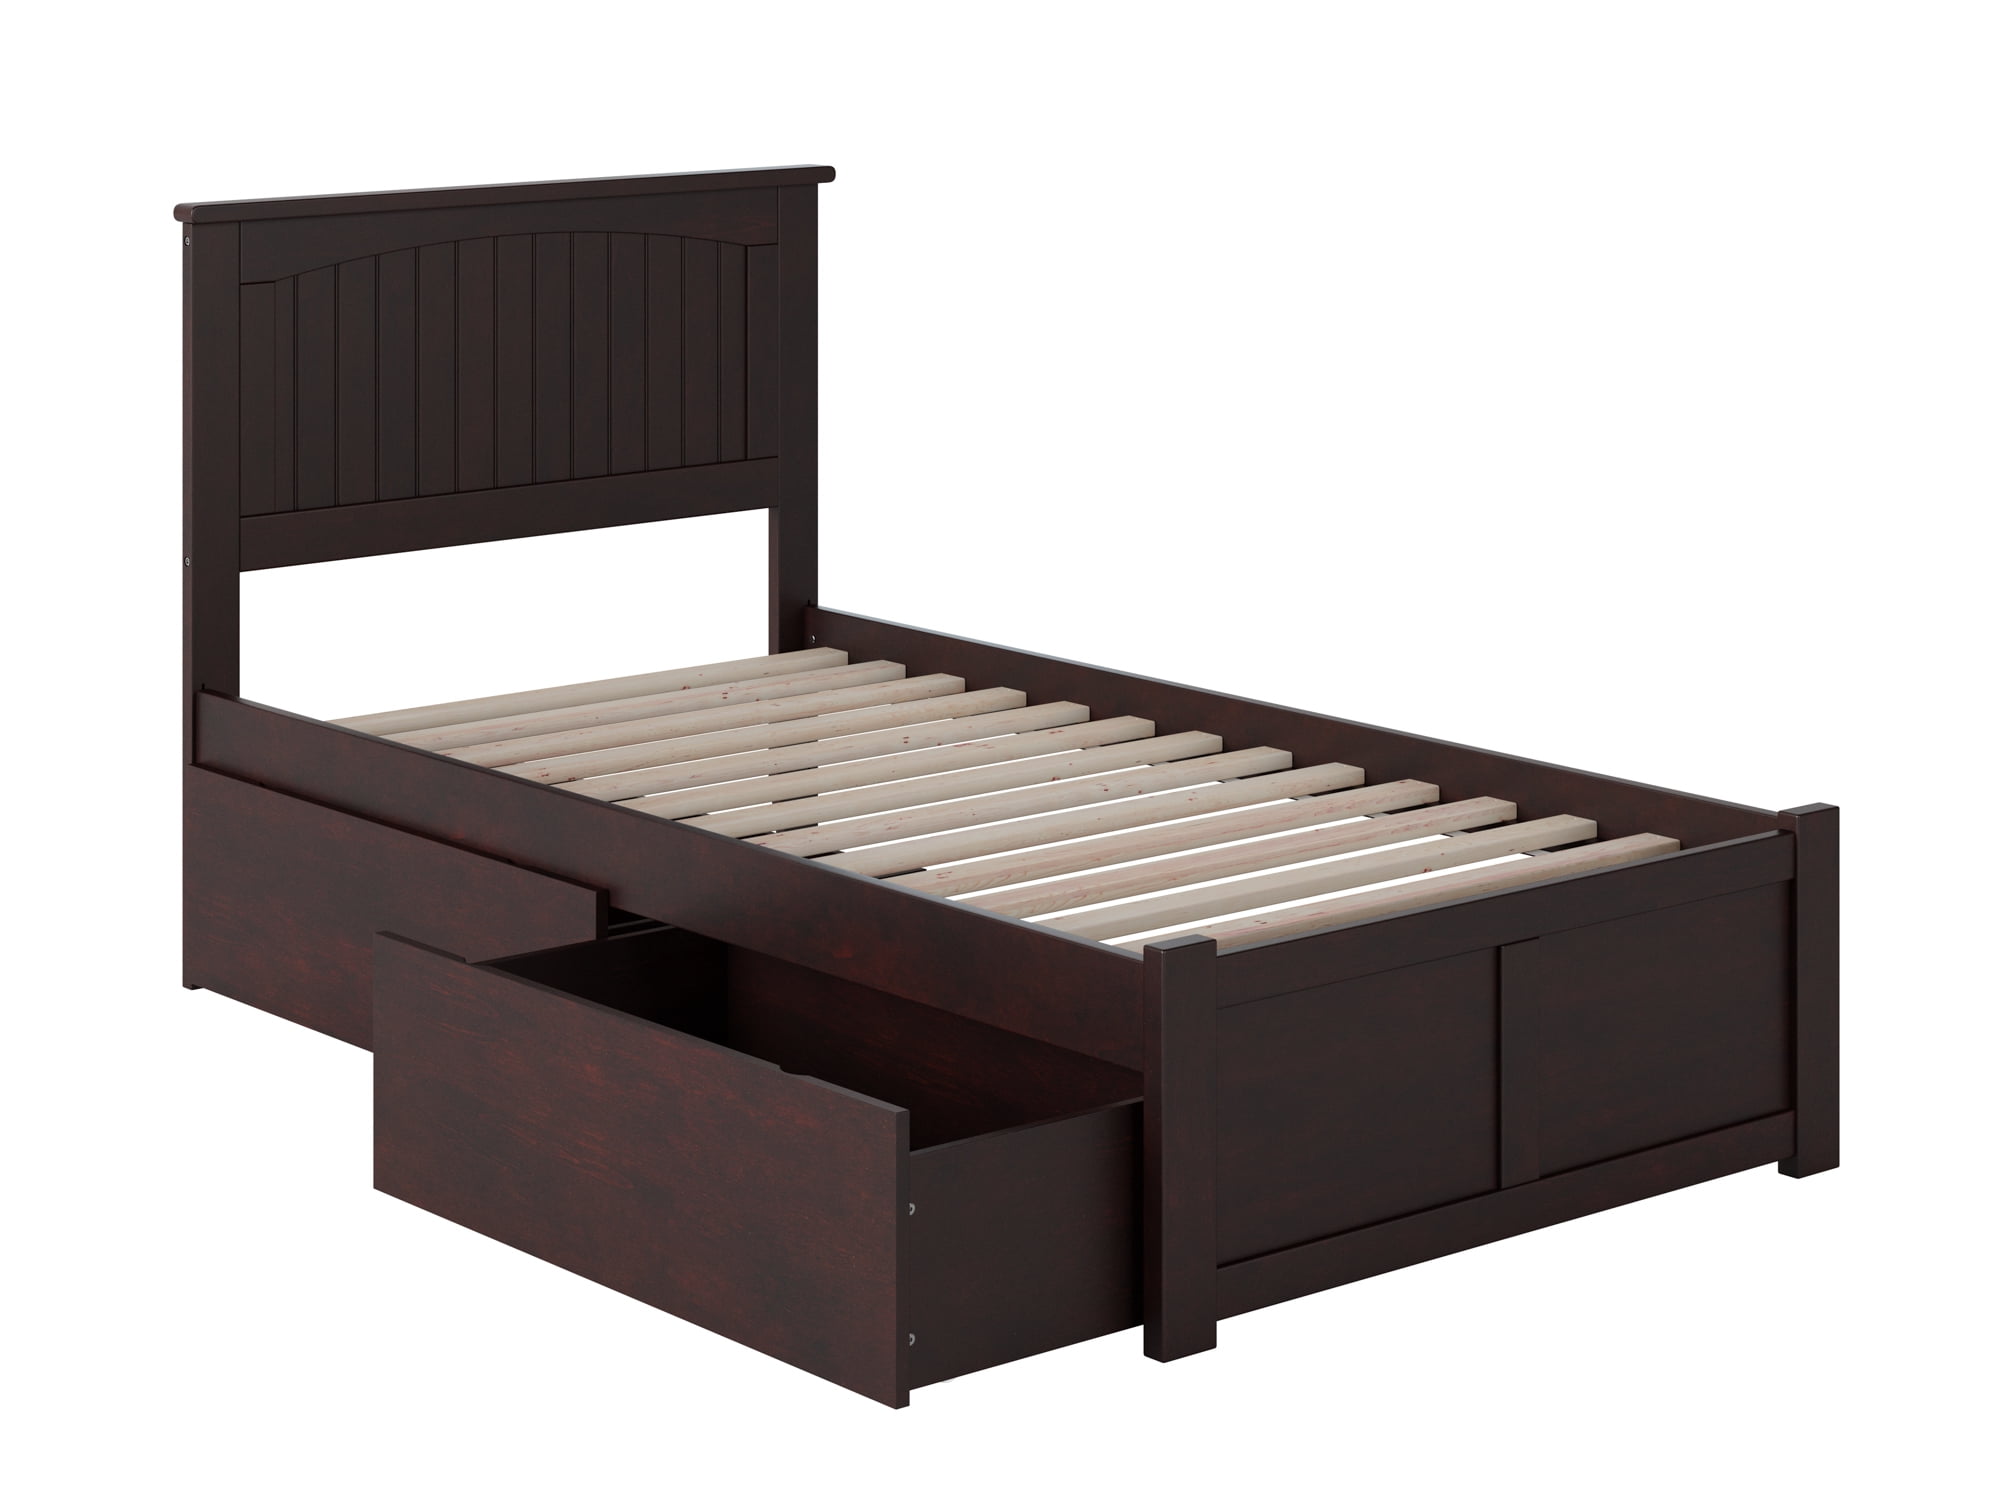 Ar8212111 Nantucket Panel Footboard & Urban Bed Drawers, Espresso - Twin Extra Large